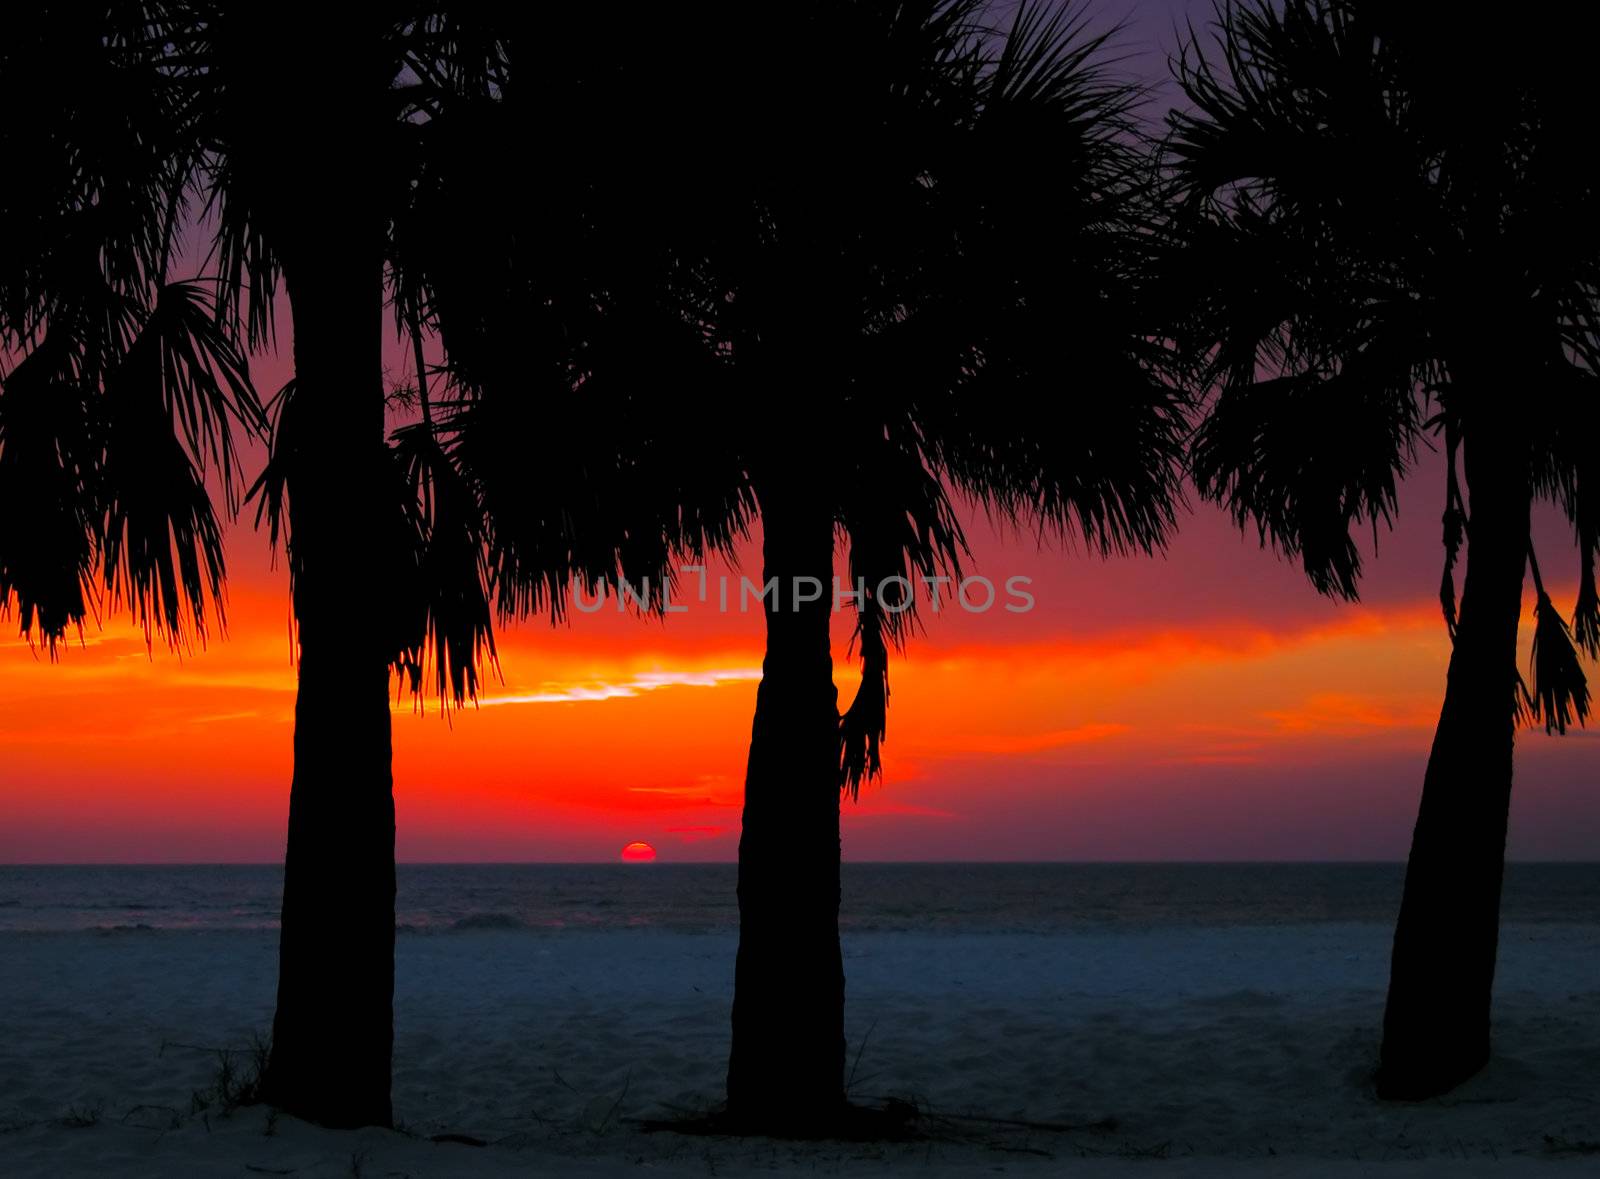 Clearwater Sunset by sbonk